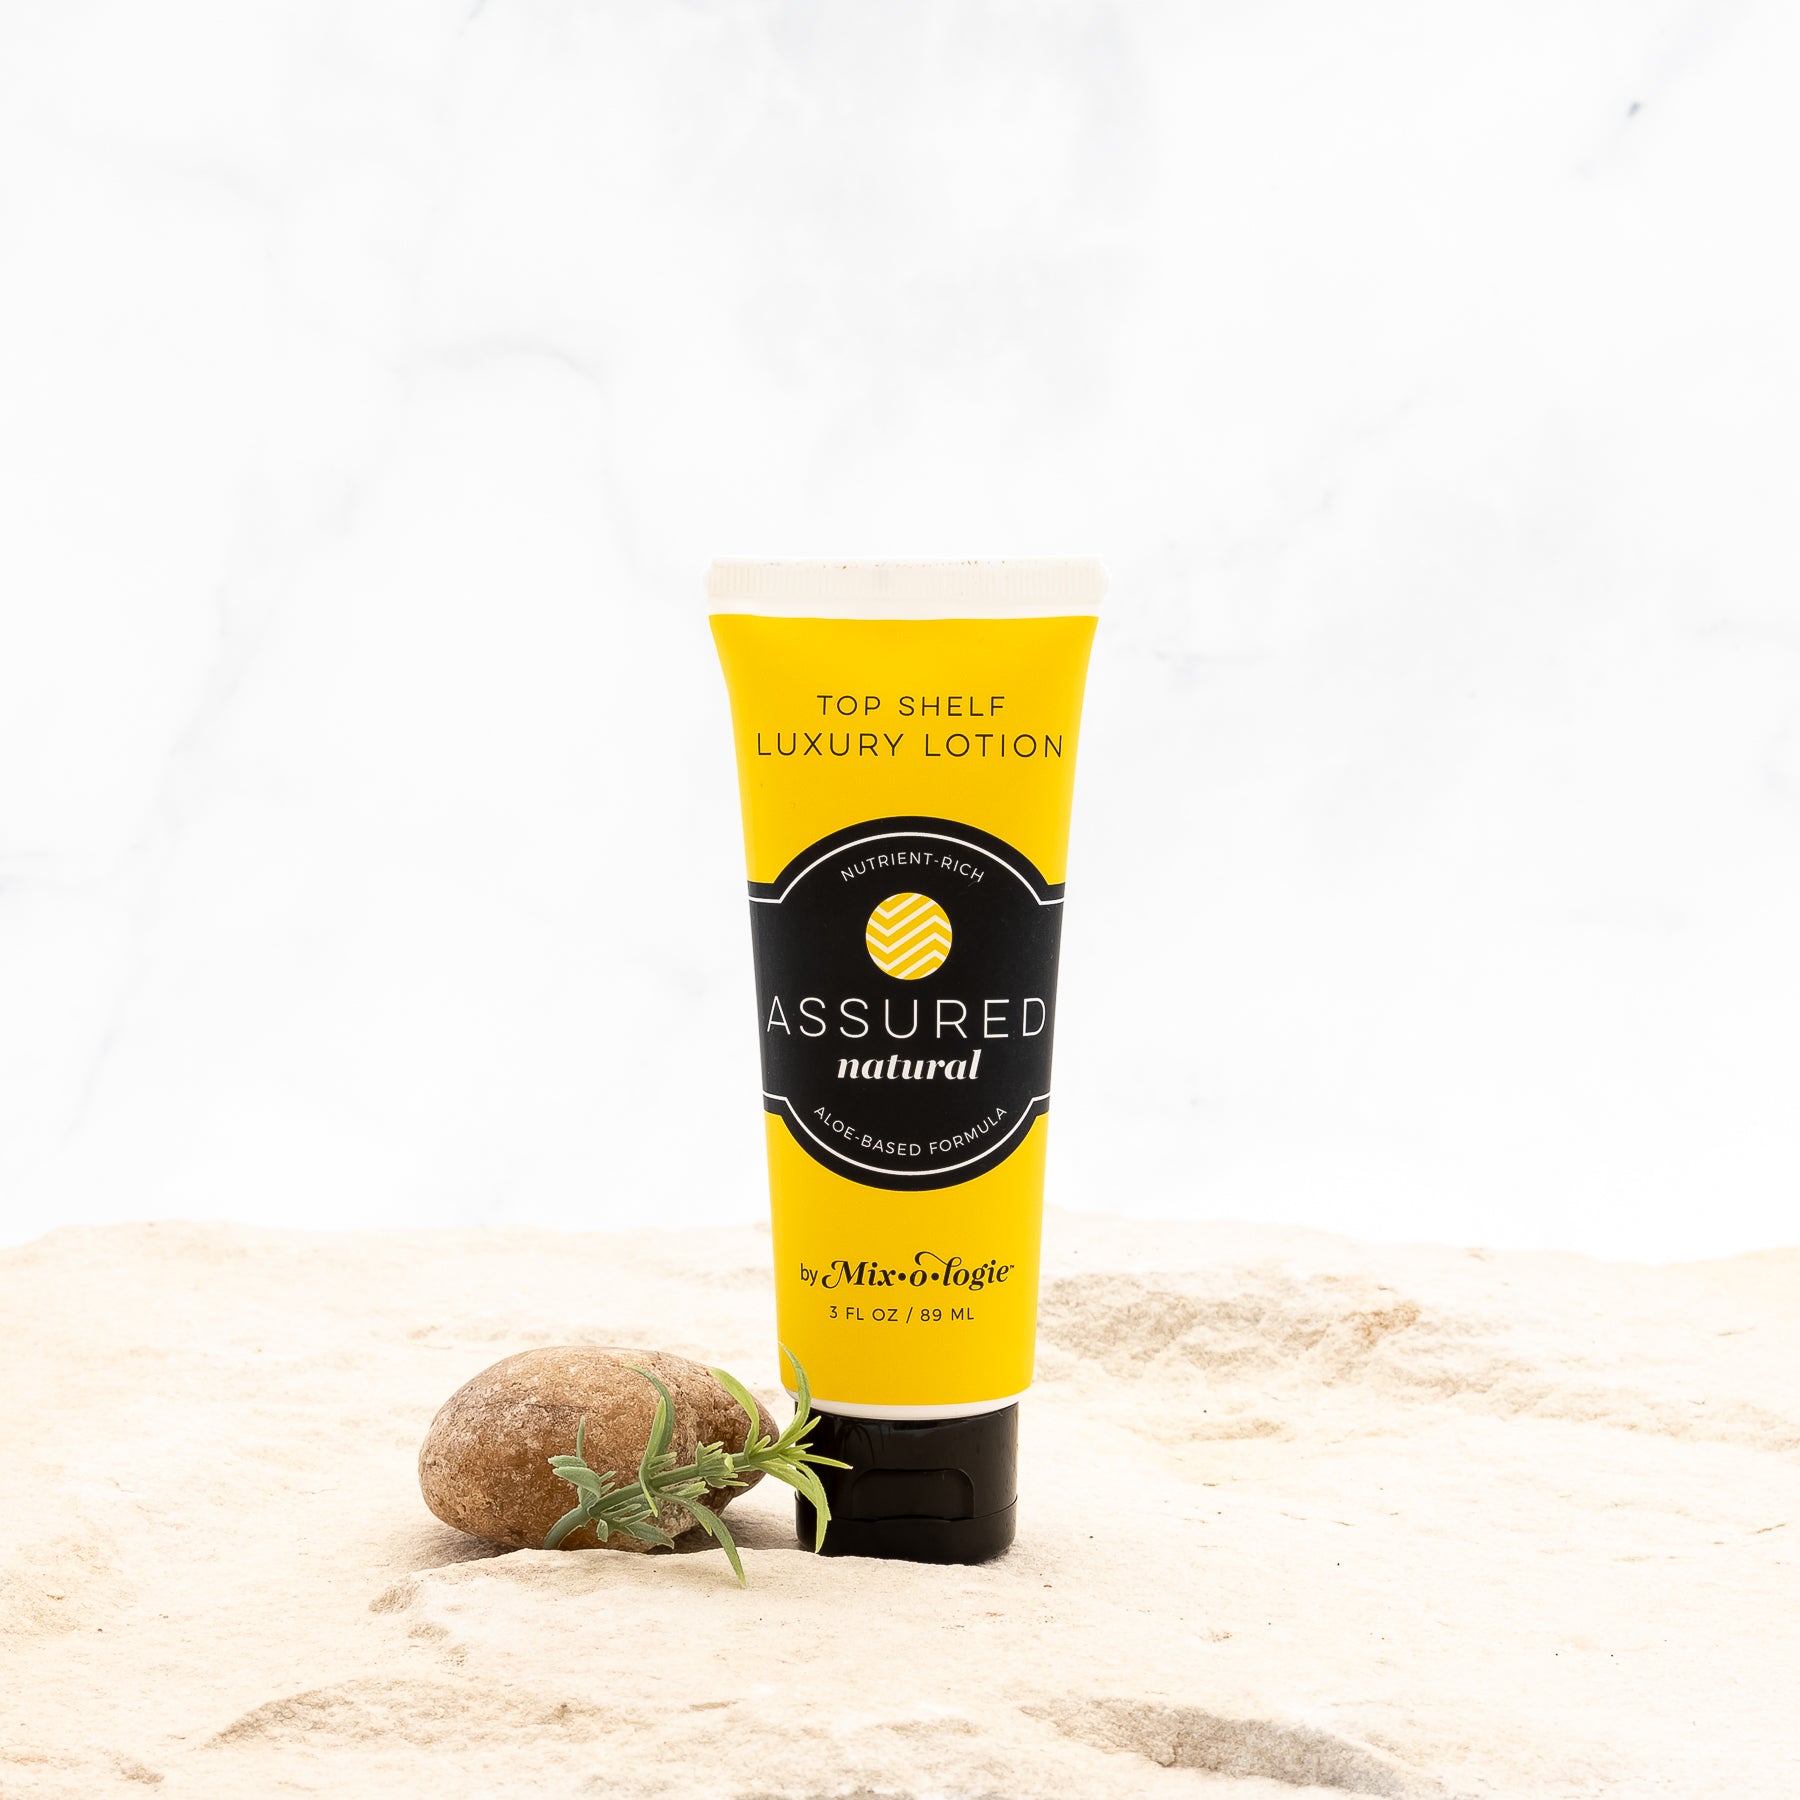 Assured (Natural) Top Shelf Lotion in mustard tube with black lid and label. Nutrient rich, aloe-based formula, tube has 5 fl oz or 89 mL. Pictured with white background, sand, rocks, and greenery. 